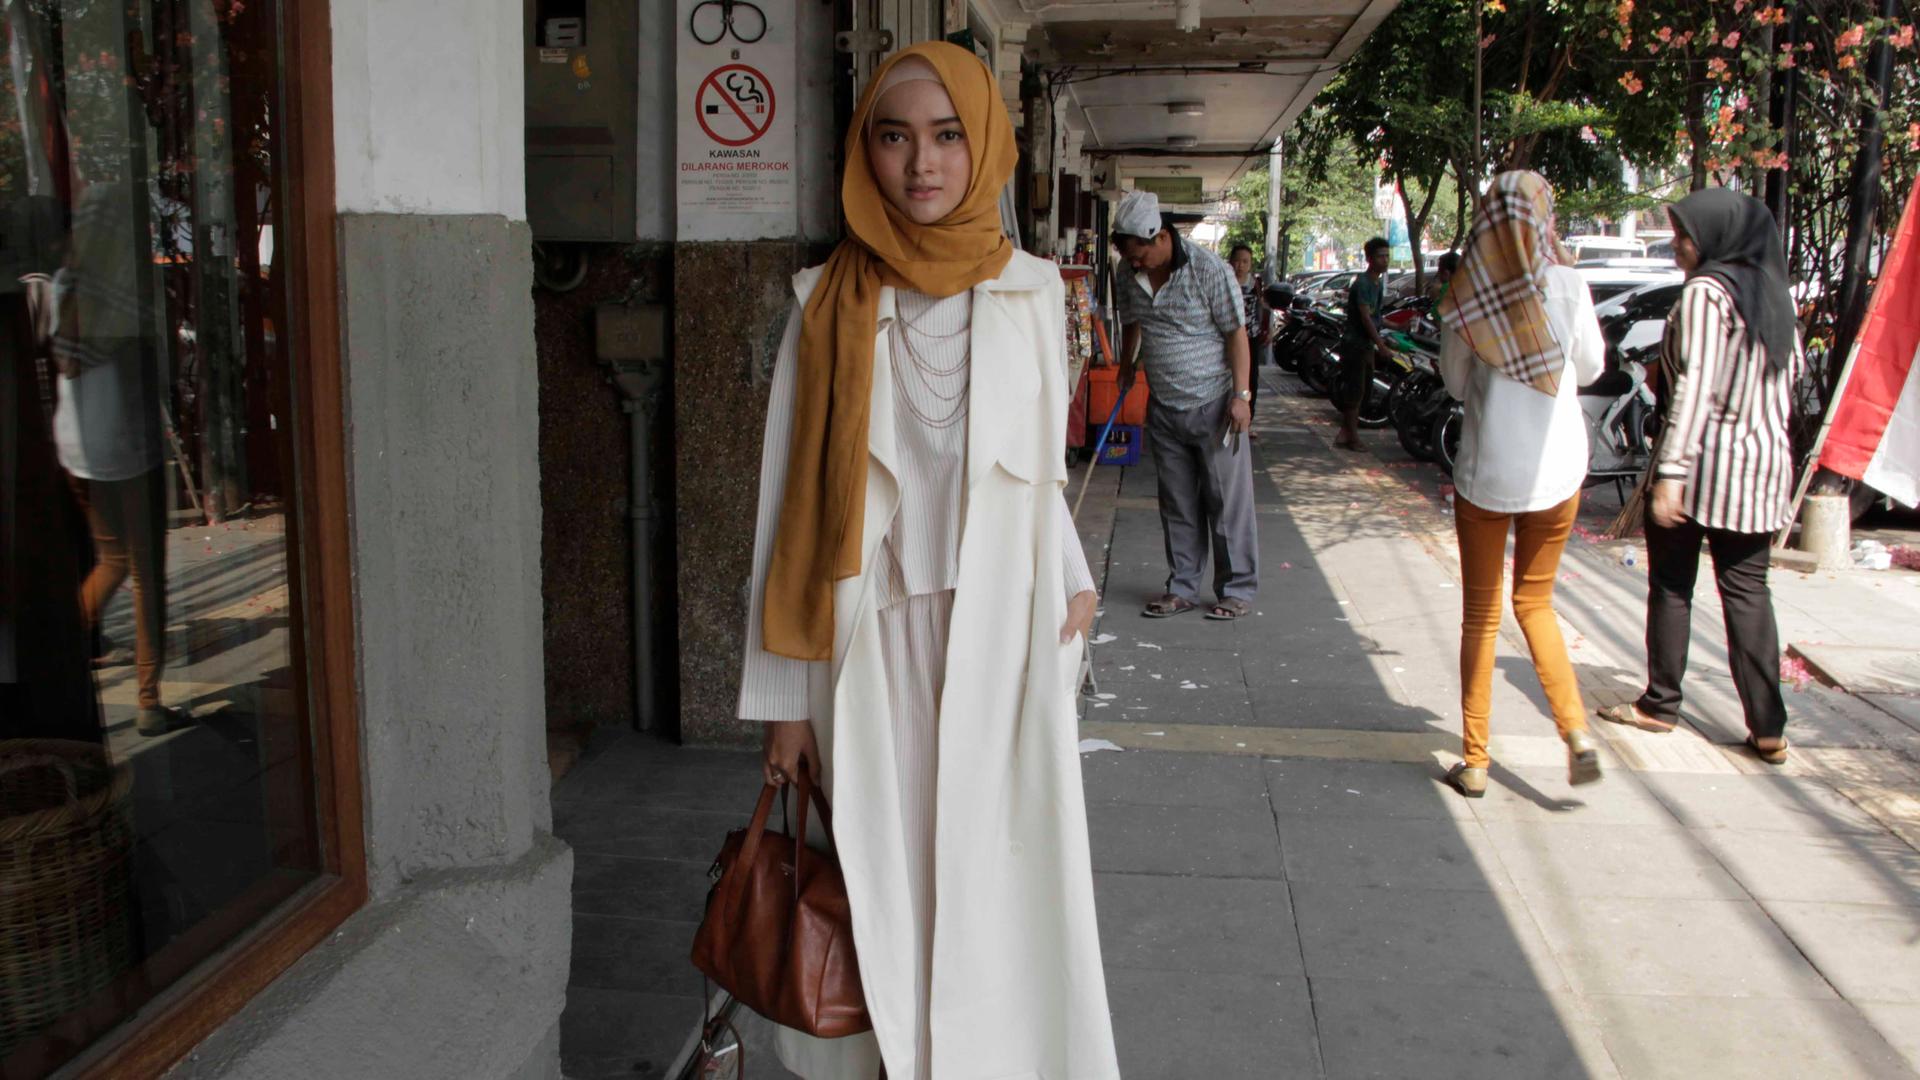 Puteri Hasannah Karunia is a popular fashion blogger, one of Indonesia's generation of young Muslim fashionistas known as "hijabers."